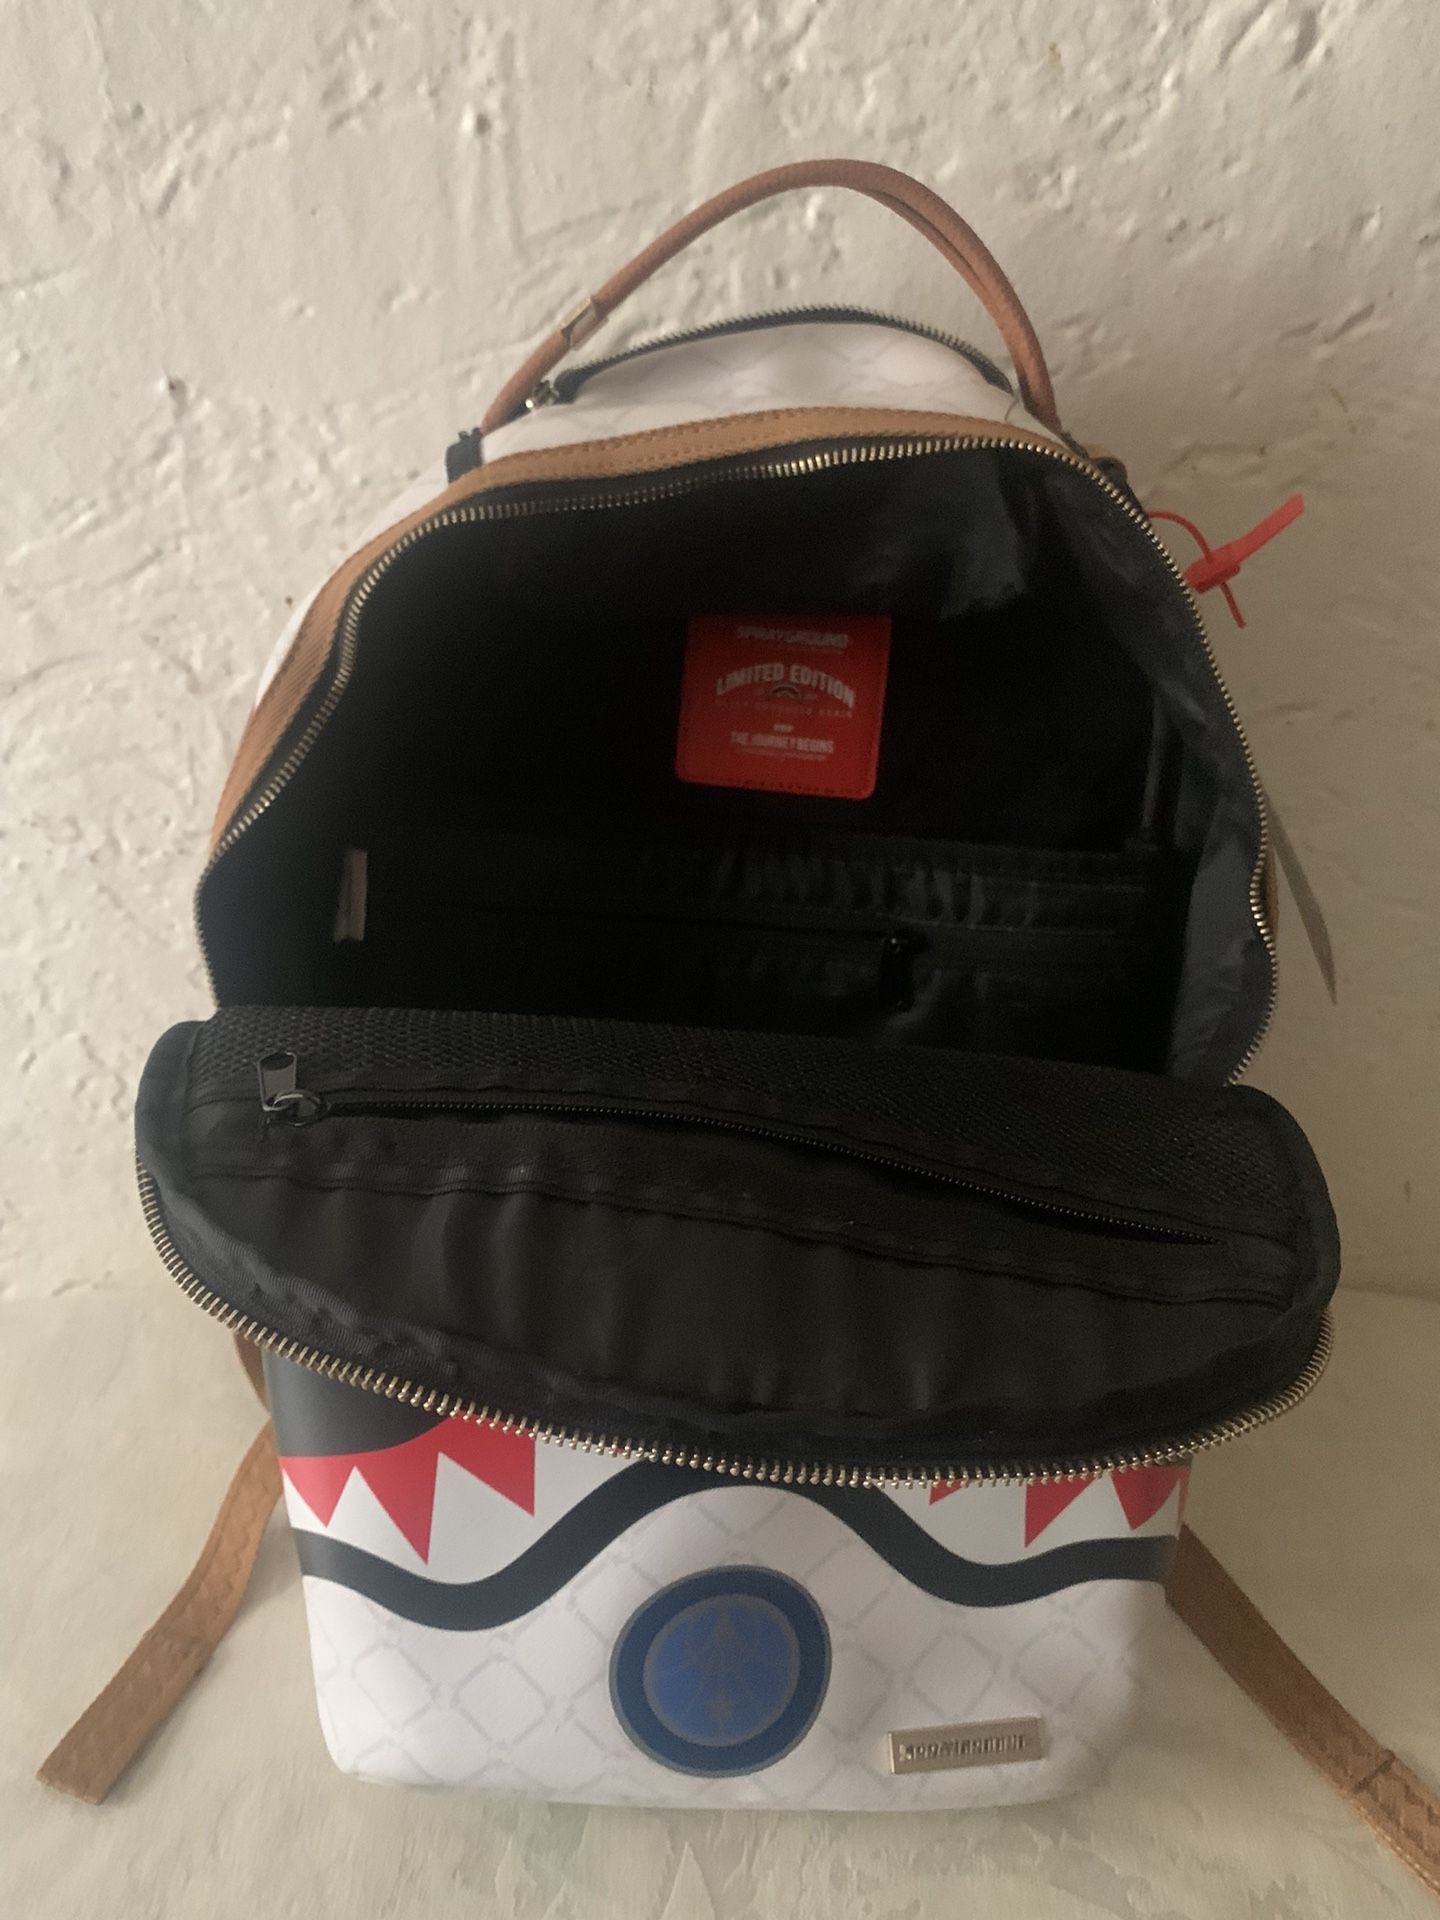 Sprayground Backpack - New with Tags for Sale in Wahiawa, HI - OfferUp